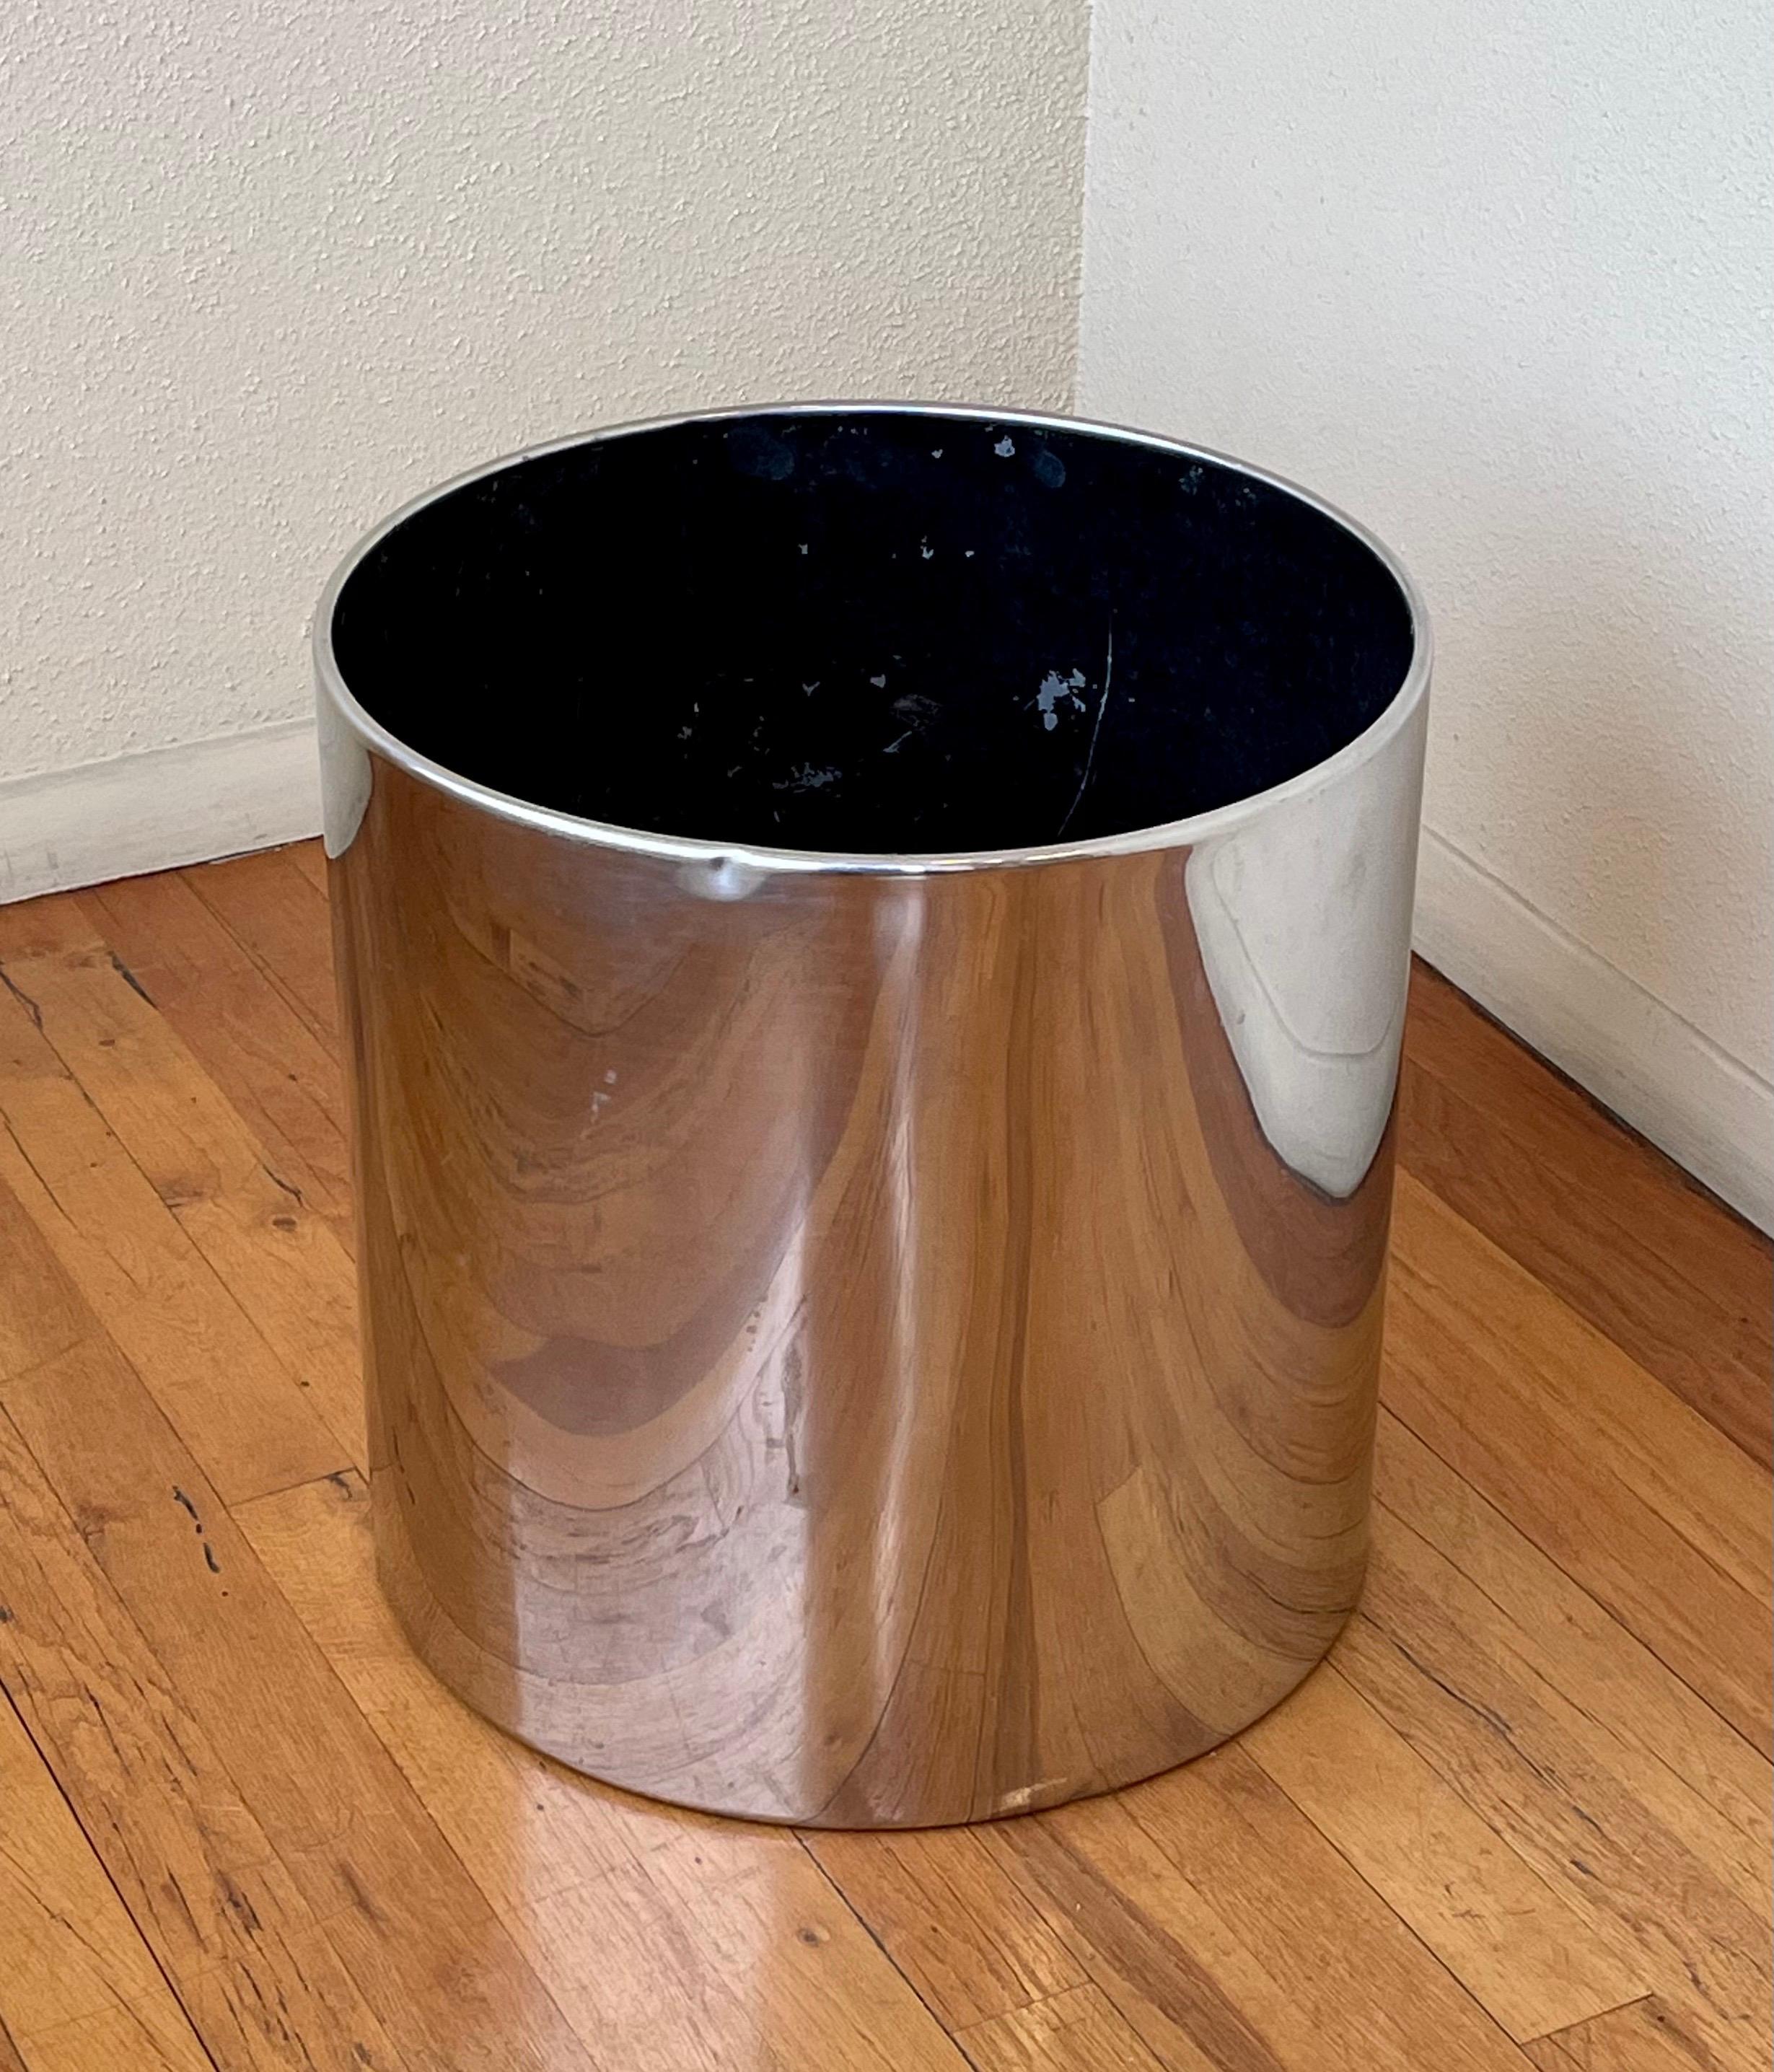 Large polished aluminum with black enameled interior a curved lip edge, shows small ding on top, very nice and clean condition considering it is over 40 years old.